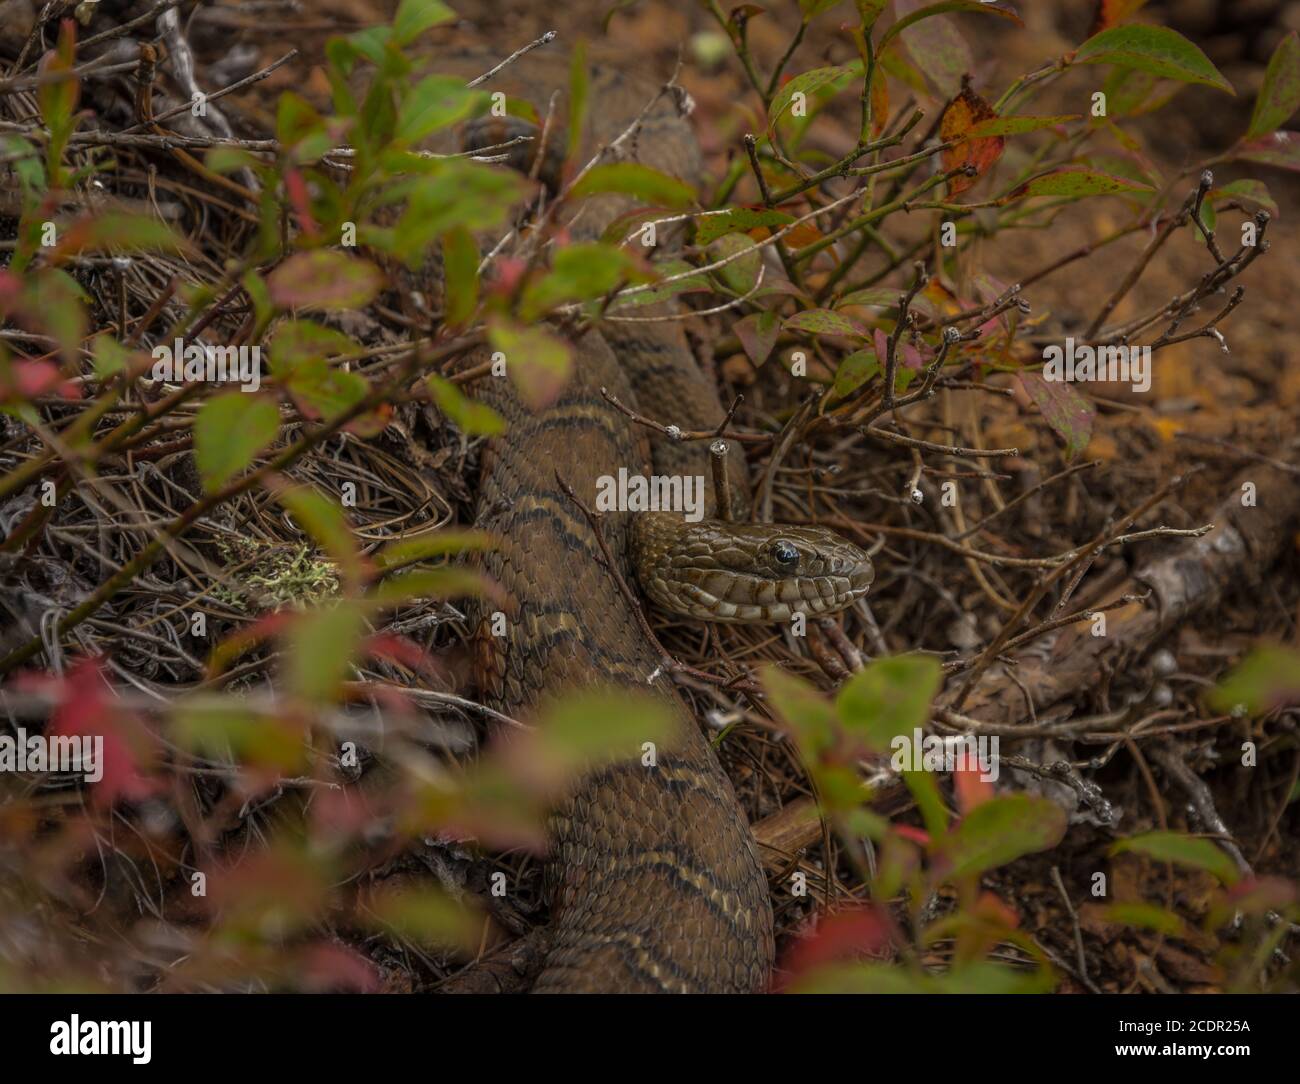 Common watersnake basking in the sun Stock Photo